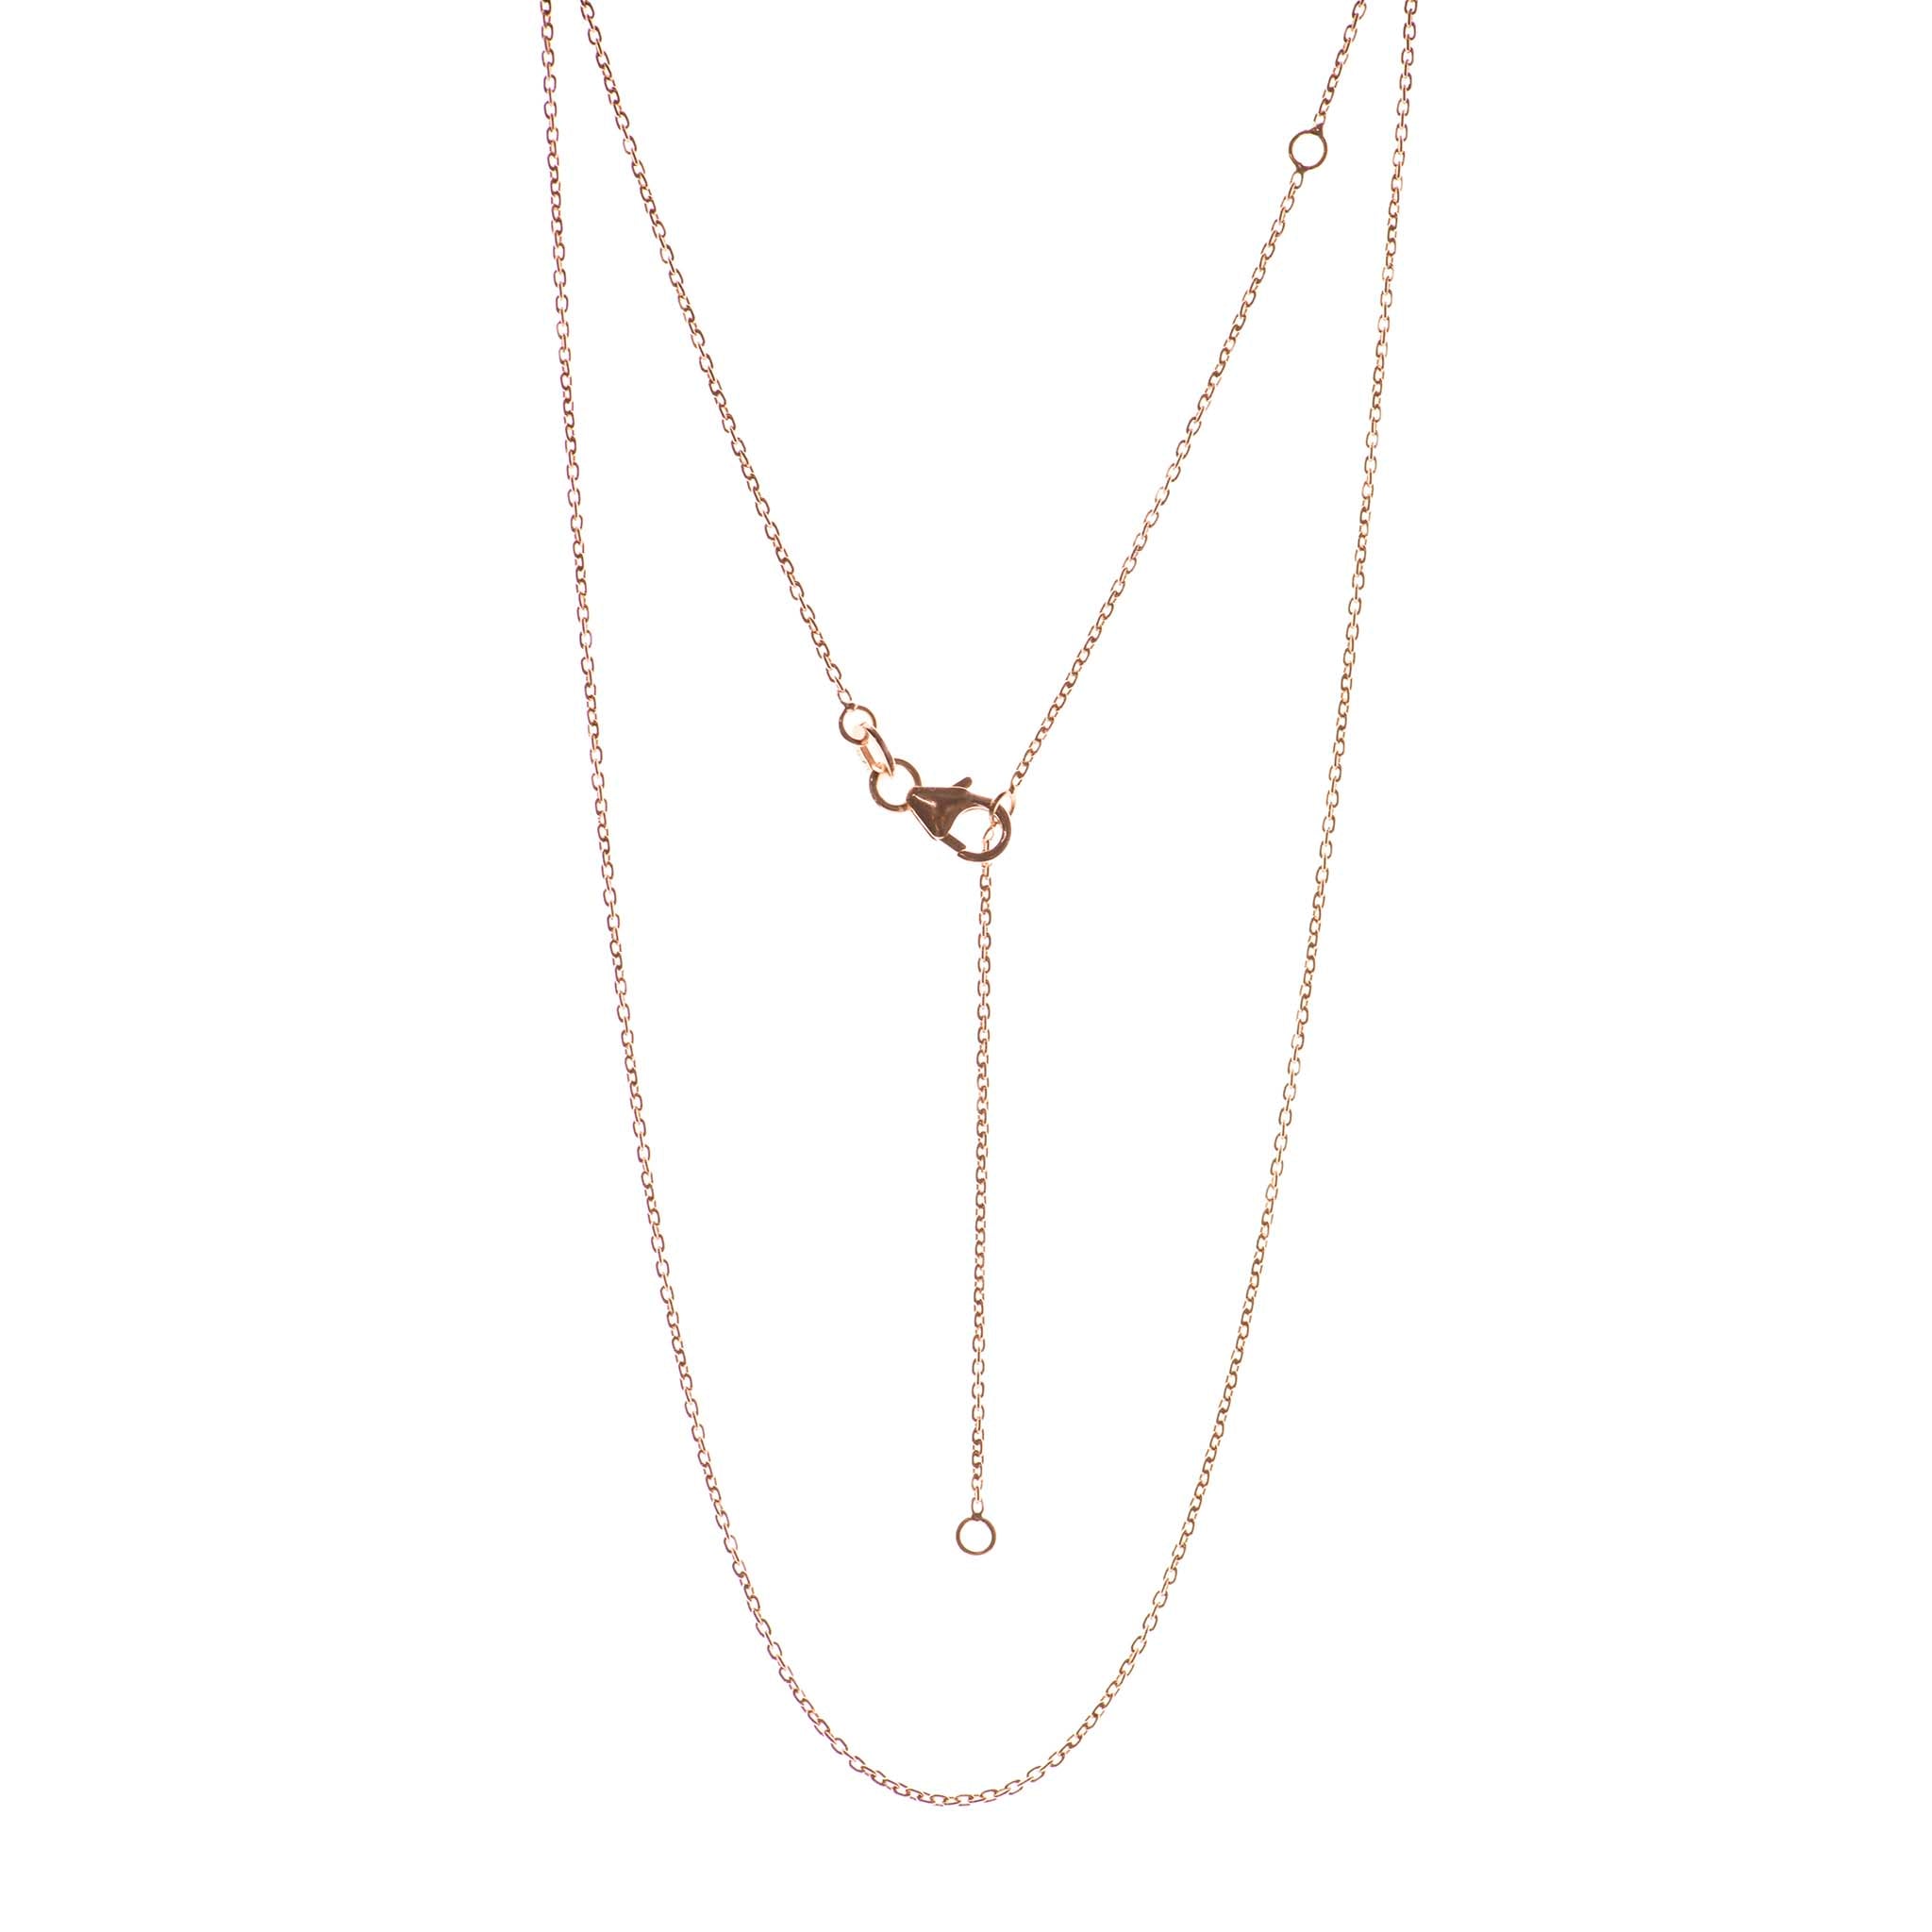 Rose gold adjustable 16-20 Inch chain